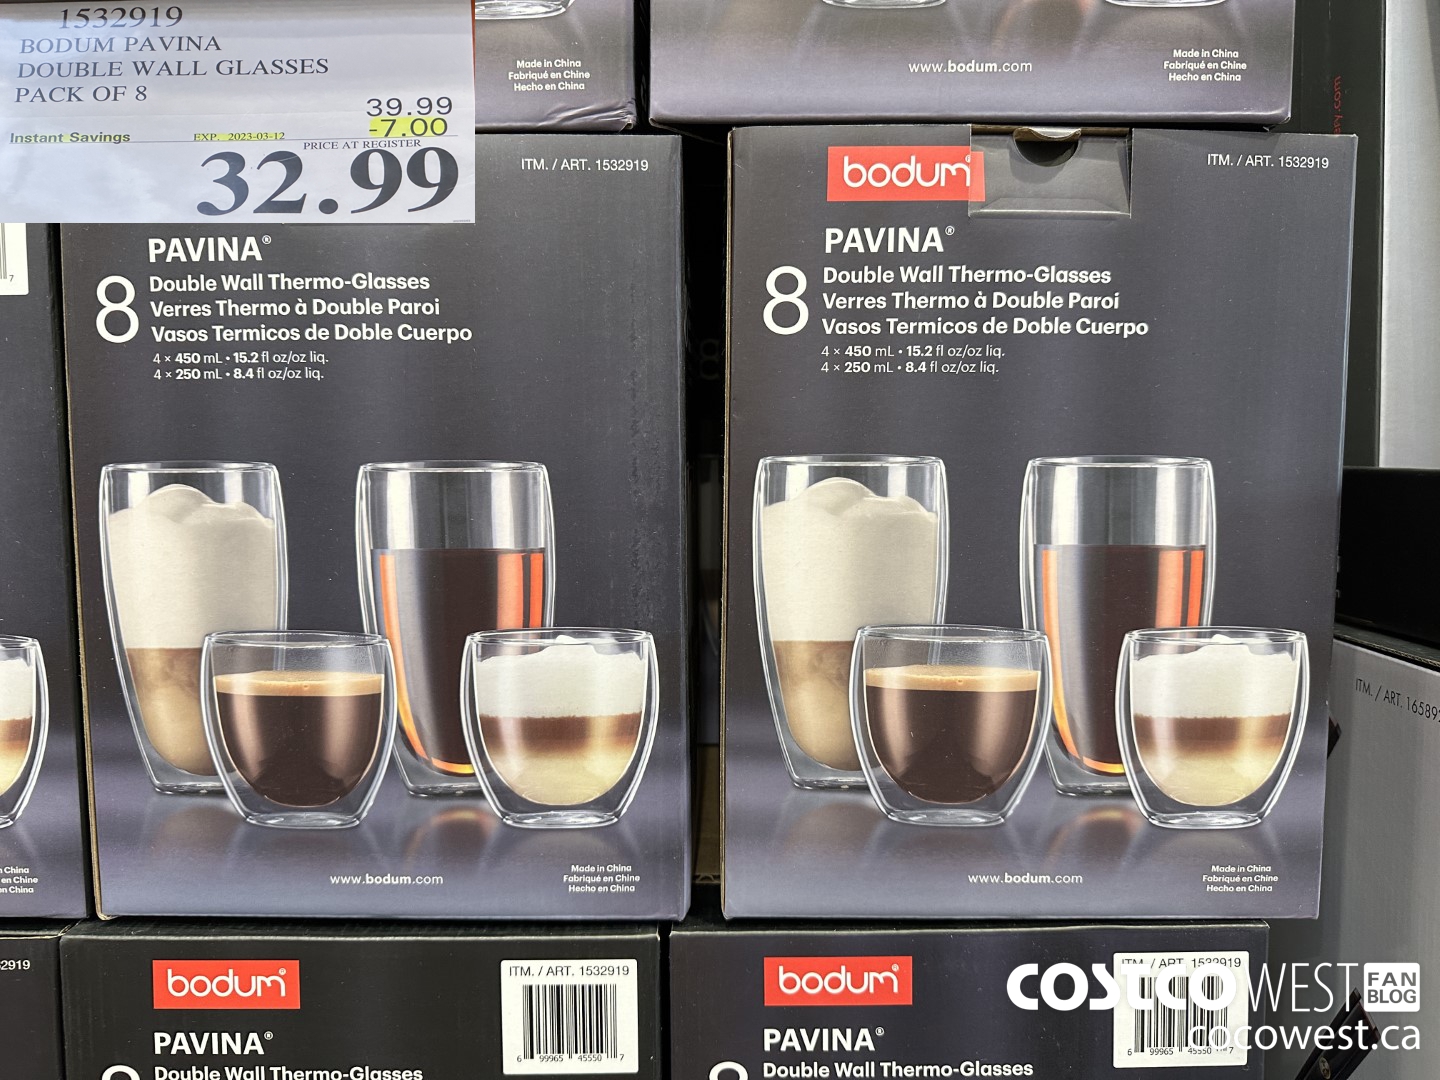 https://west.cocowest1.ca/uploads/2023/03/BODUM_PAVINA_DOUBLE_WALL_GLASSES_PACK_OF_8_20230306_117486.jpg